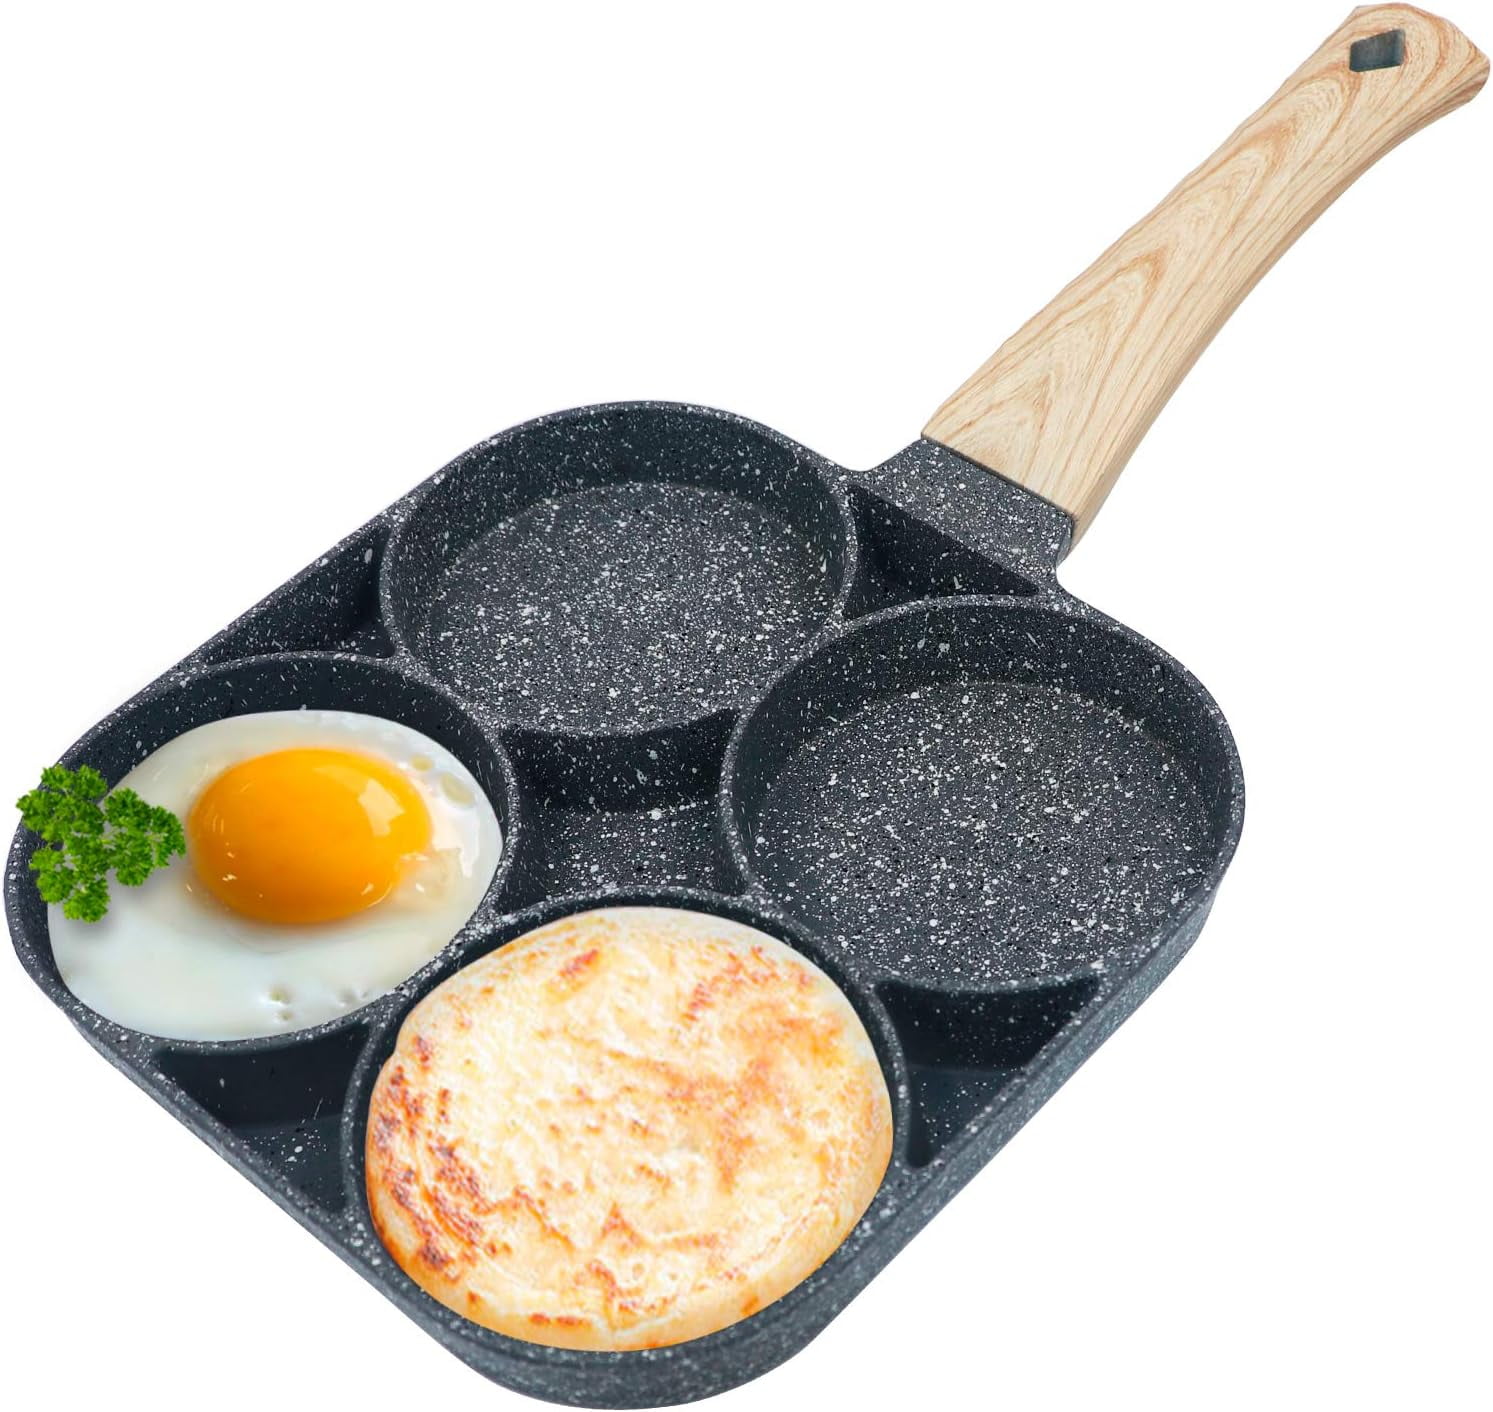  Single Egg Pan, 4.72 Inch Pure-iron One Egg Frying Pan with  Dupont Coating Nonstick Single Egg Frying Pan for Scrambled Eggs Omelets &  Pancakes Making: Home & Kitchen